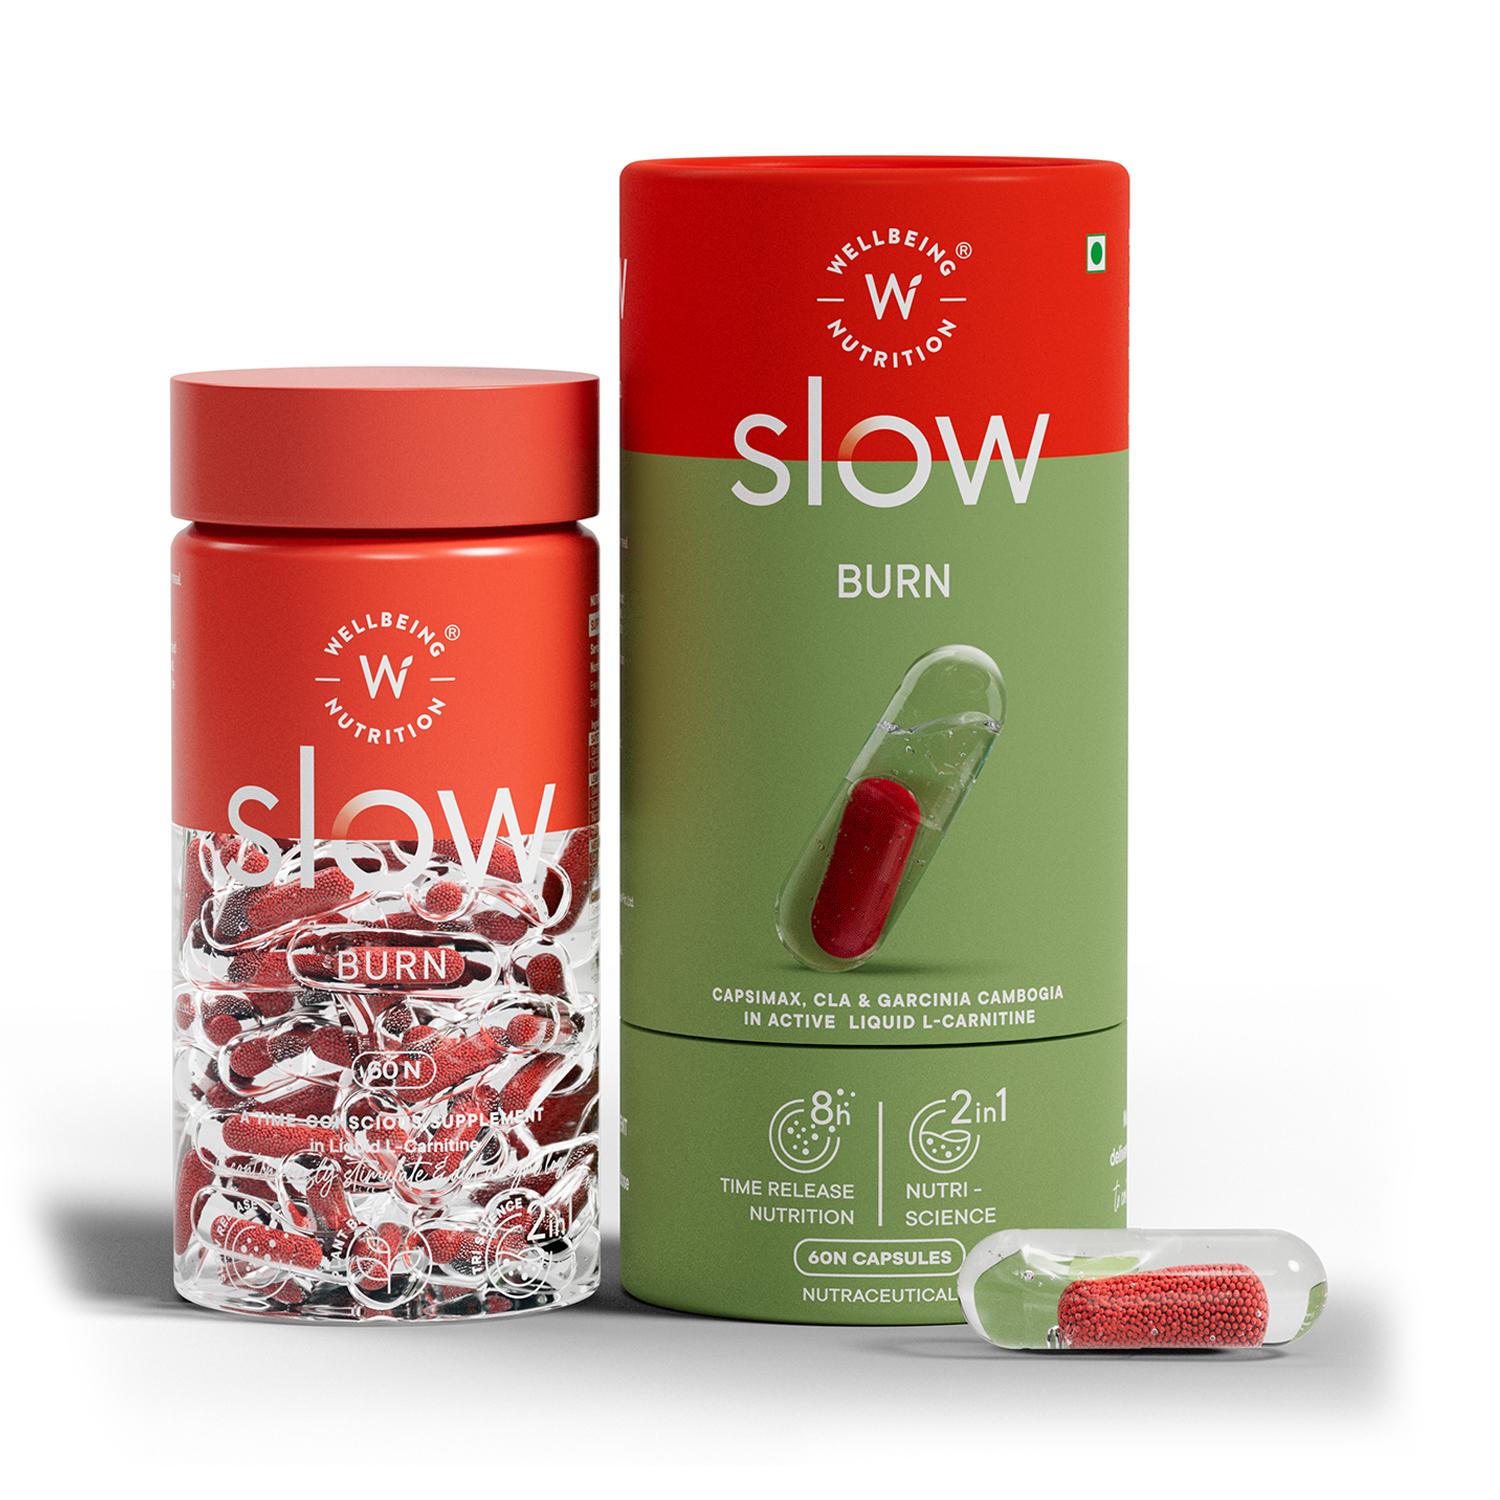 Wellbeing Nutrition | Wellbeing Nutrition Slow- Burn with Caffeine & Chromium in L-Carnitine for Wight Loss & Fat Burn